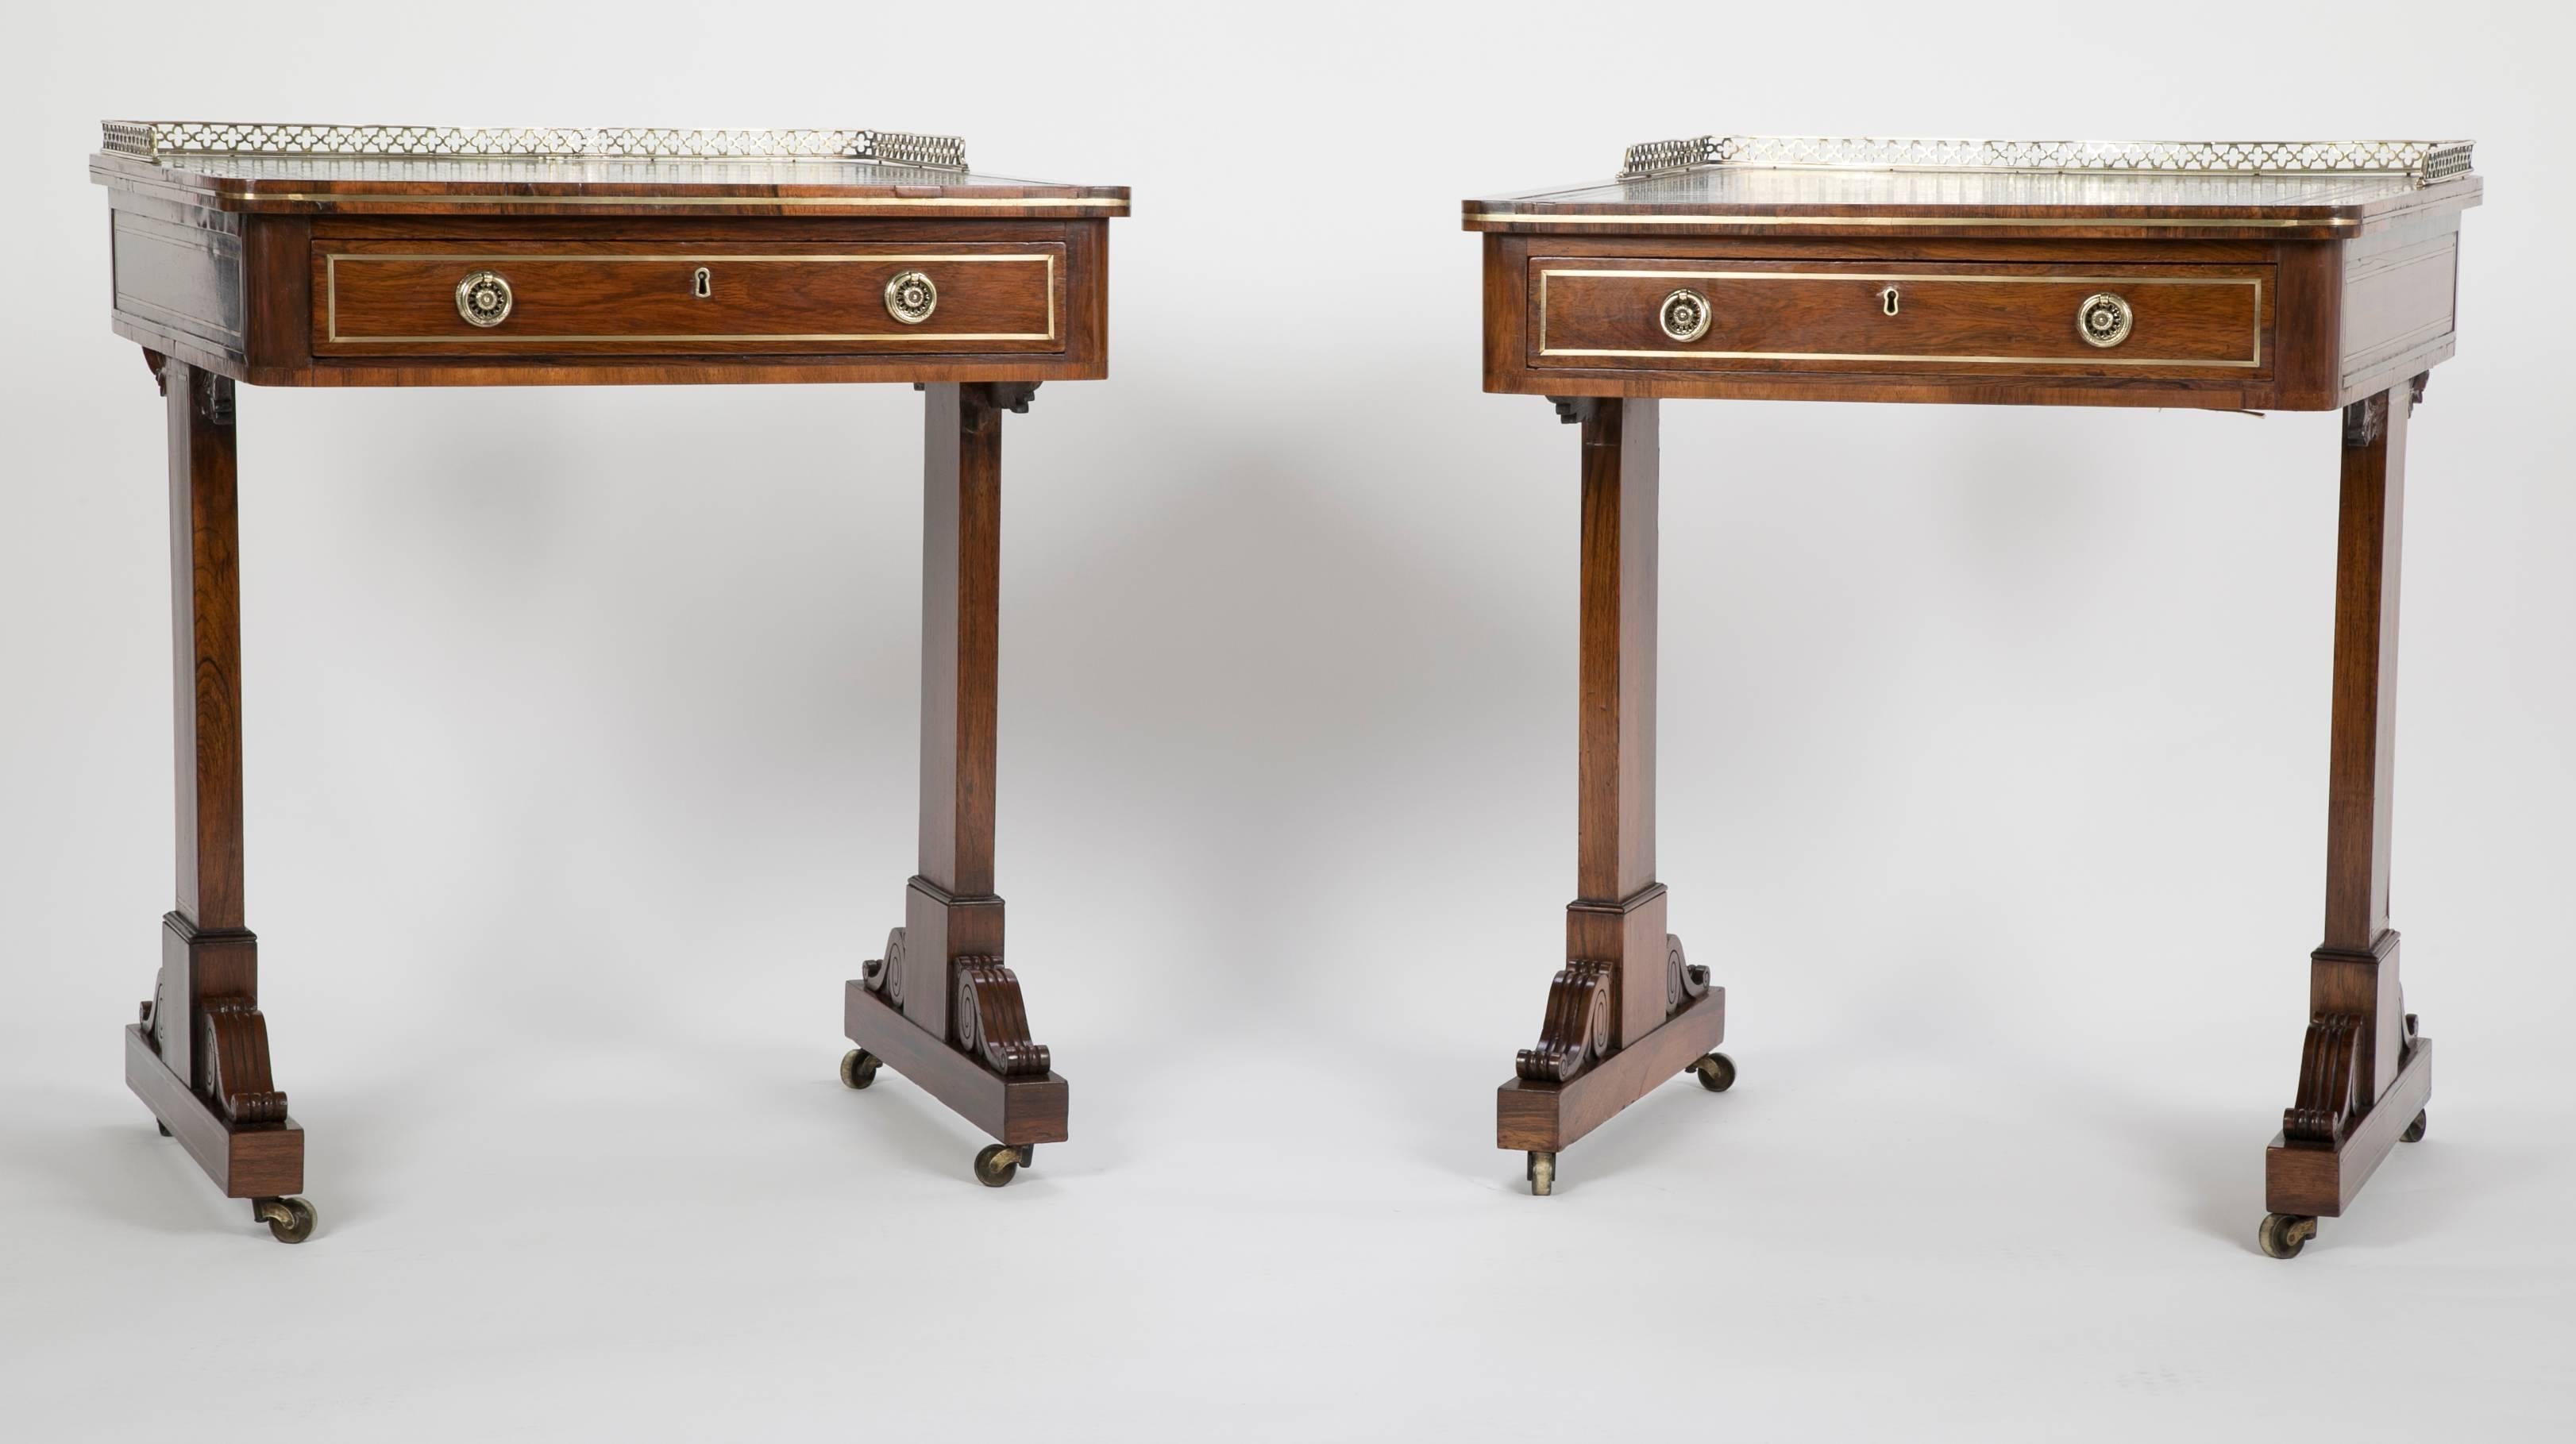 Pair of English Regency period rosewood writing tables with gold tooled green leather tops. The pair were most likely formerly used as school desks for privately educated students.